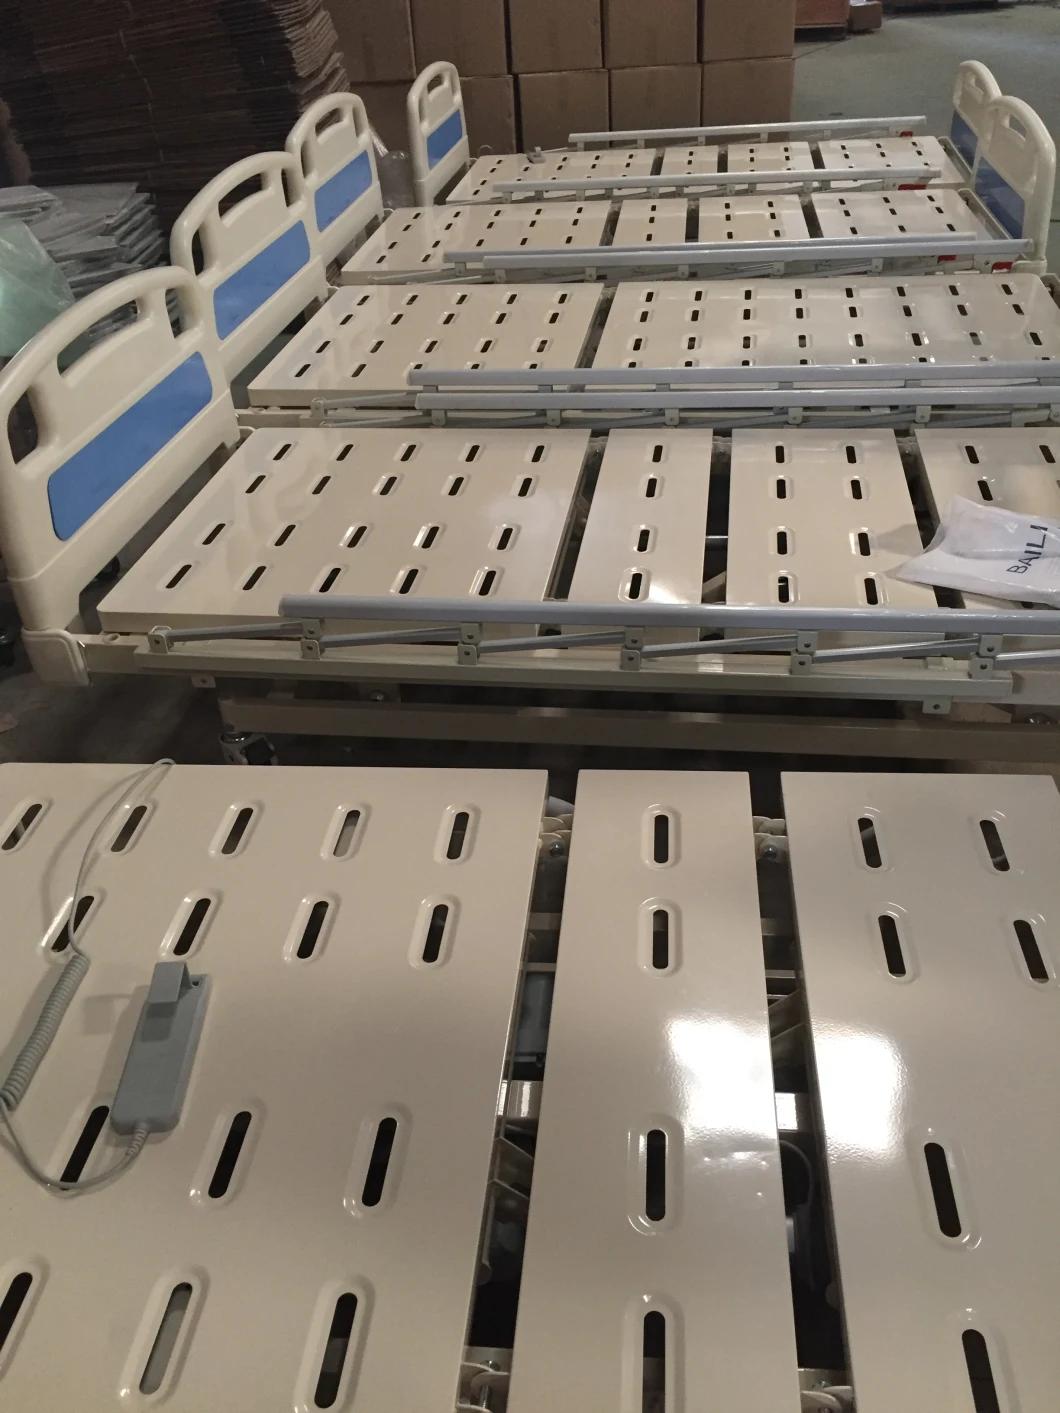 Medical Hospital Bed with Five Function Electric ICU Bed (SLV-B4150)